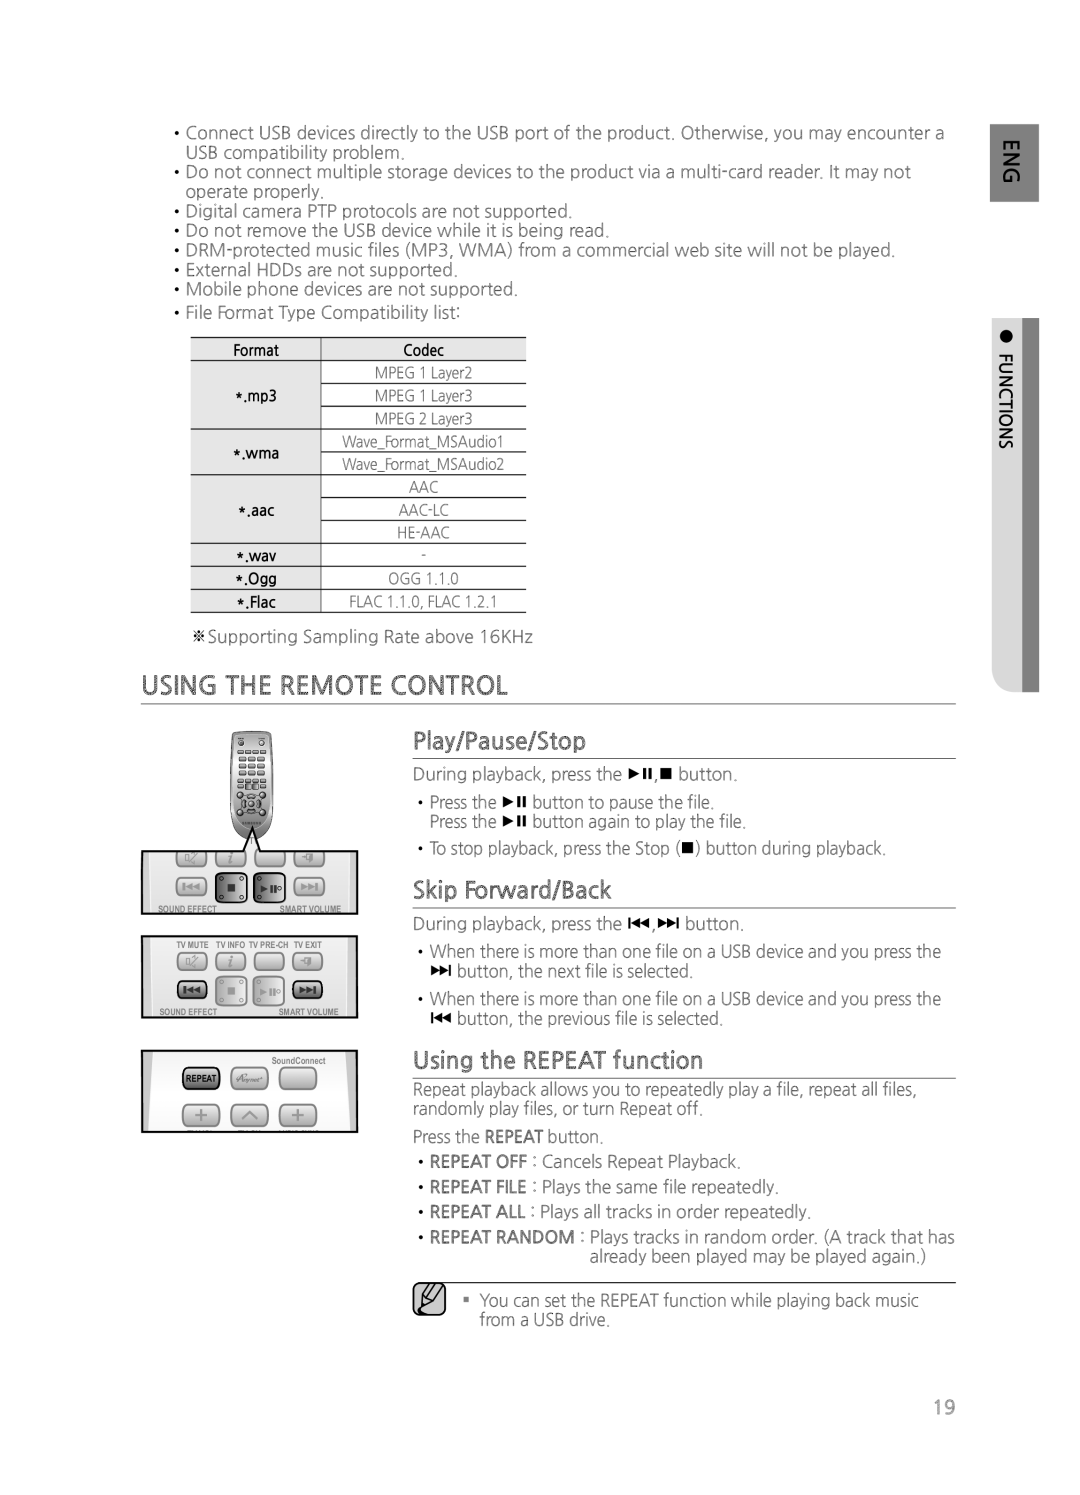 Samsung HW-H551/ZA, HWH550 Using The Remote Control, POWER Play/Pause/Stop, Skip Forward/Back, Using the REPEAT function 